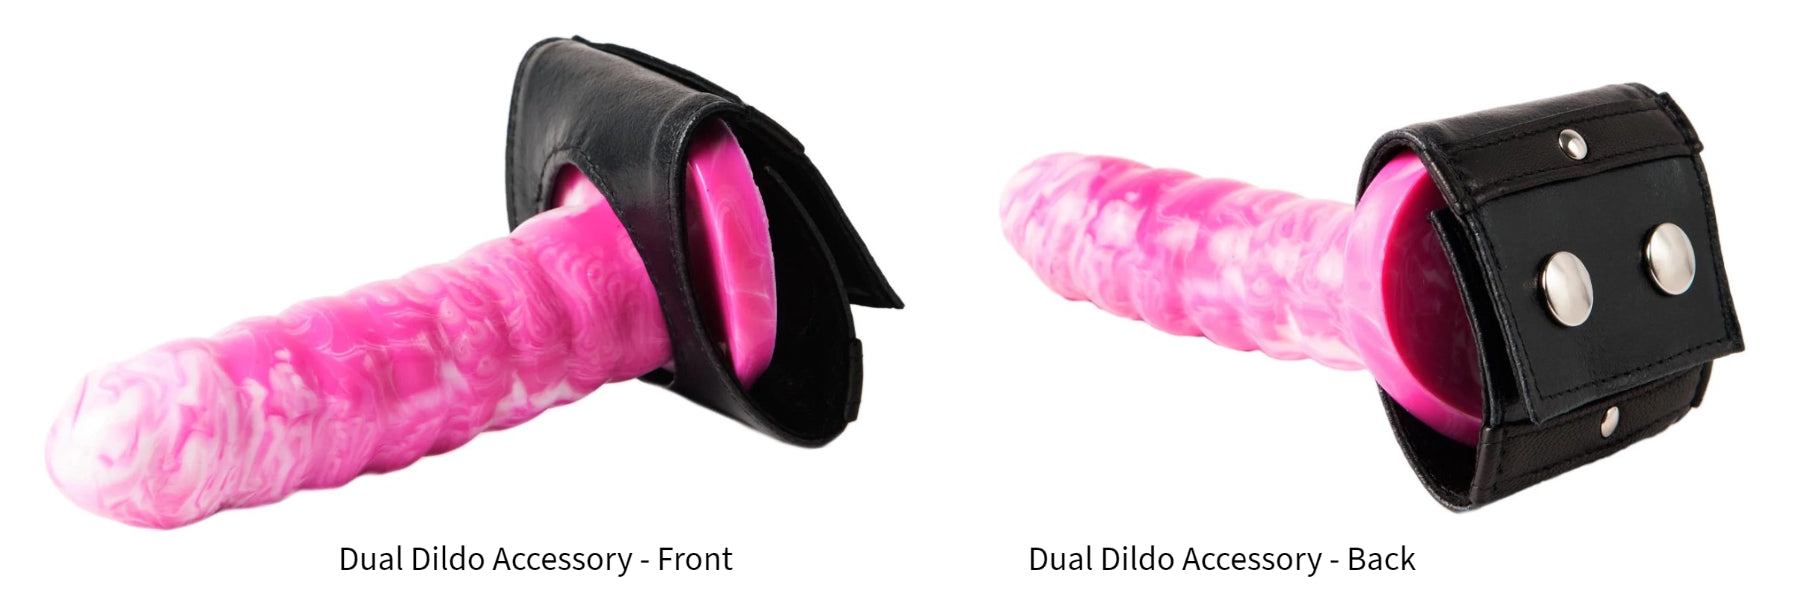 a pink and white marbled dildo with rigs inside a dual dildo accessory